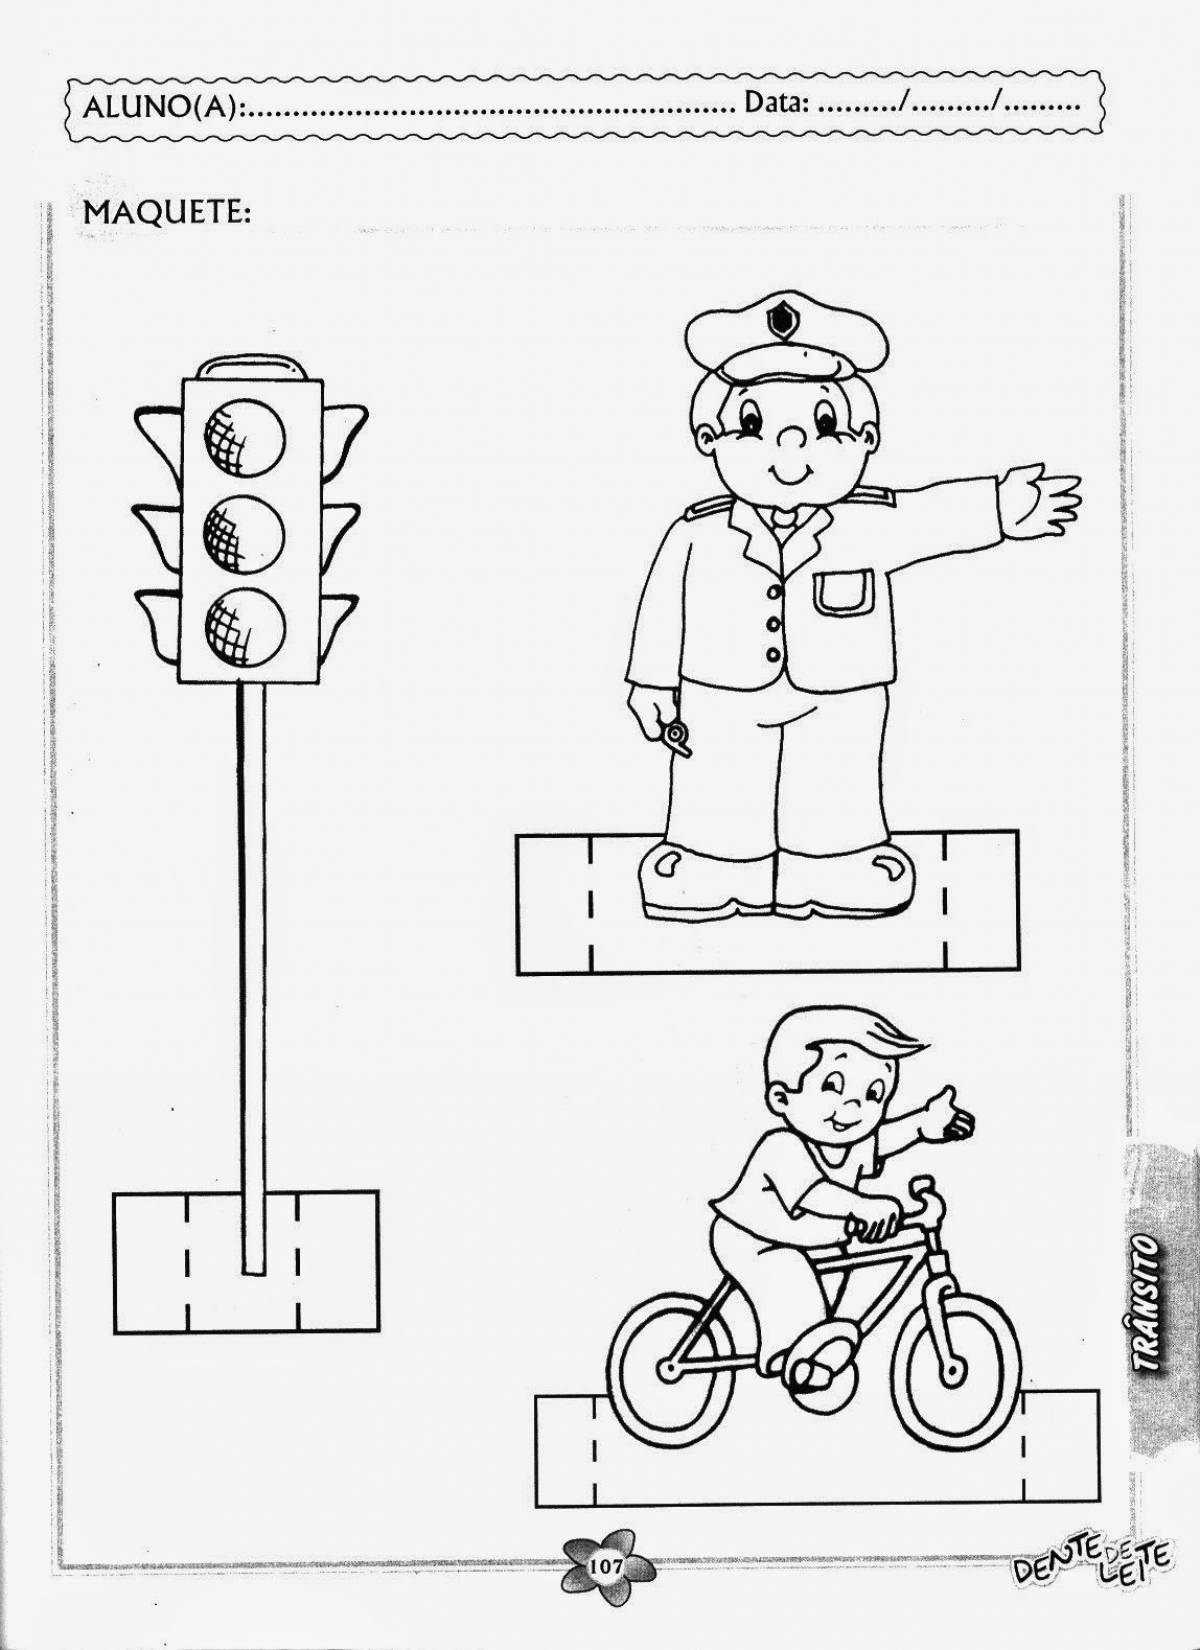 According to traffic rules for preschoolers preparatory group #15